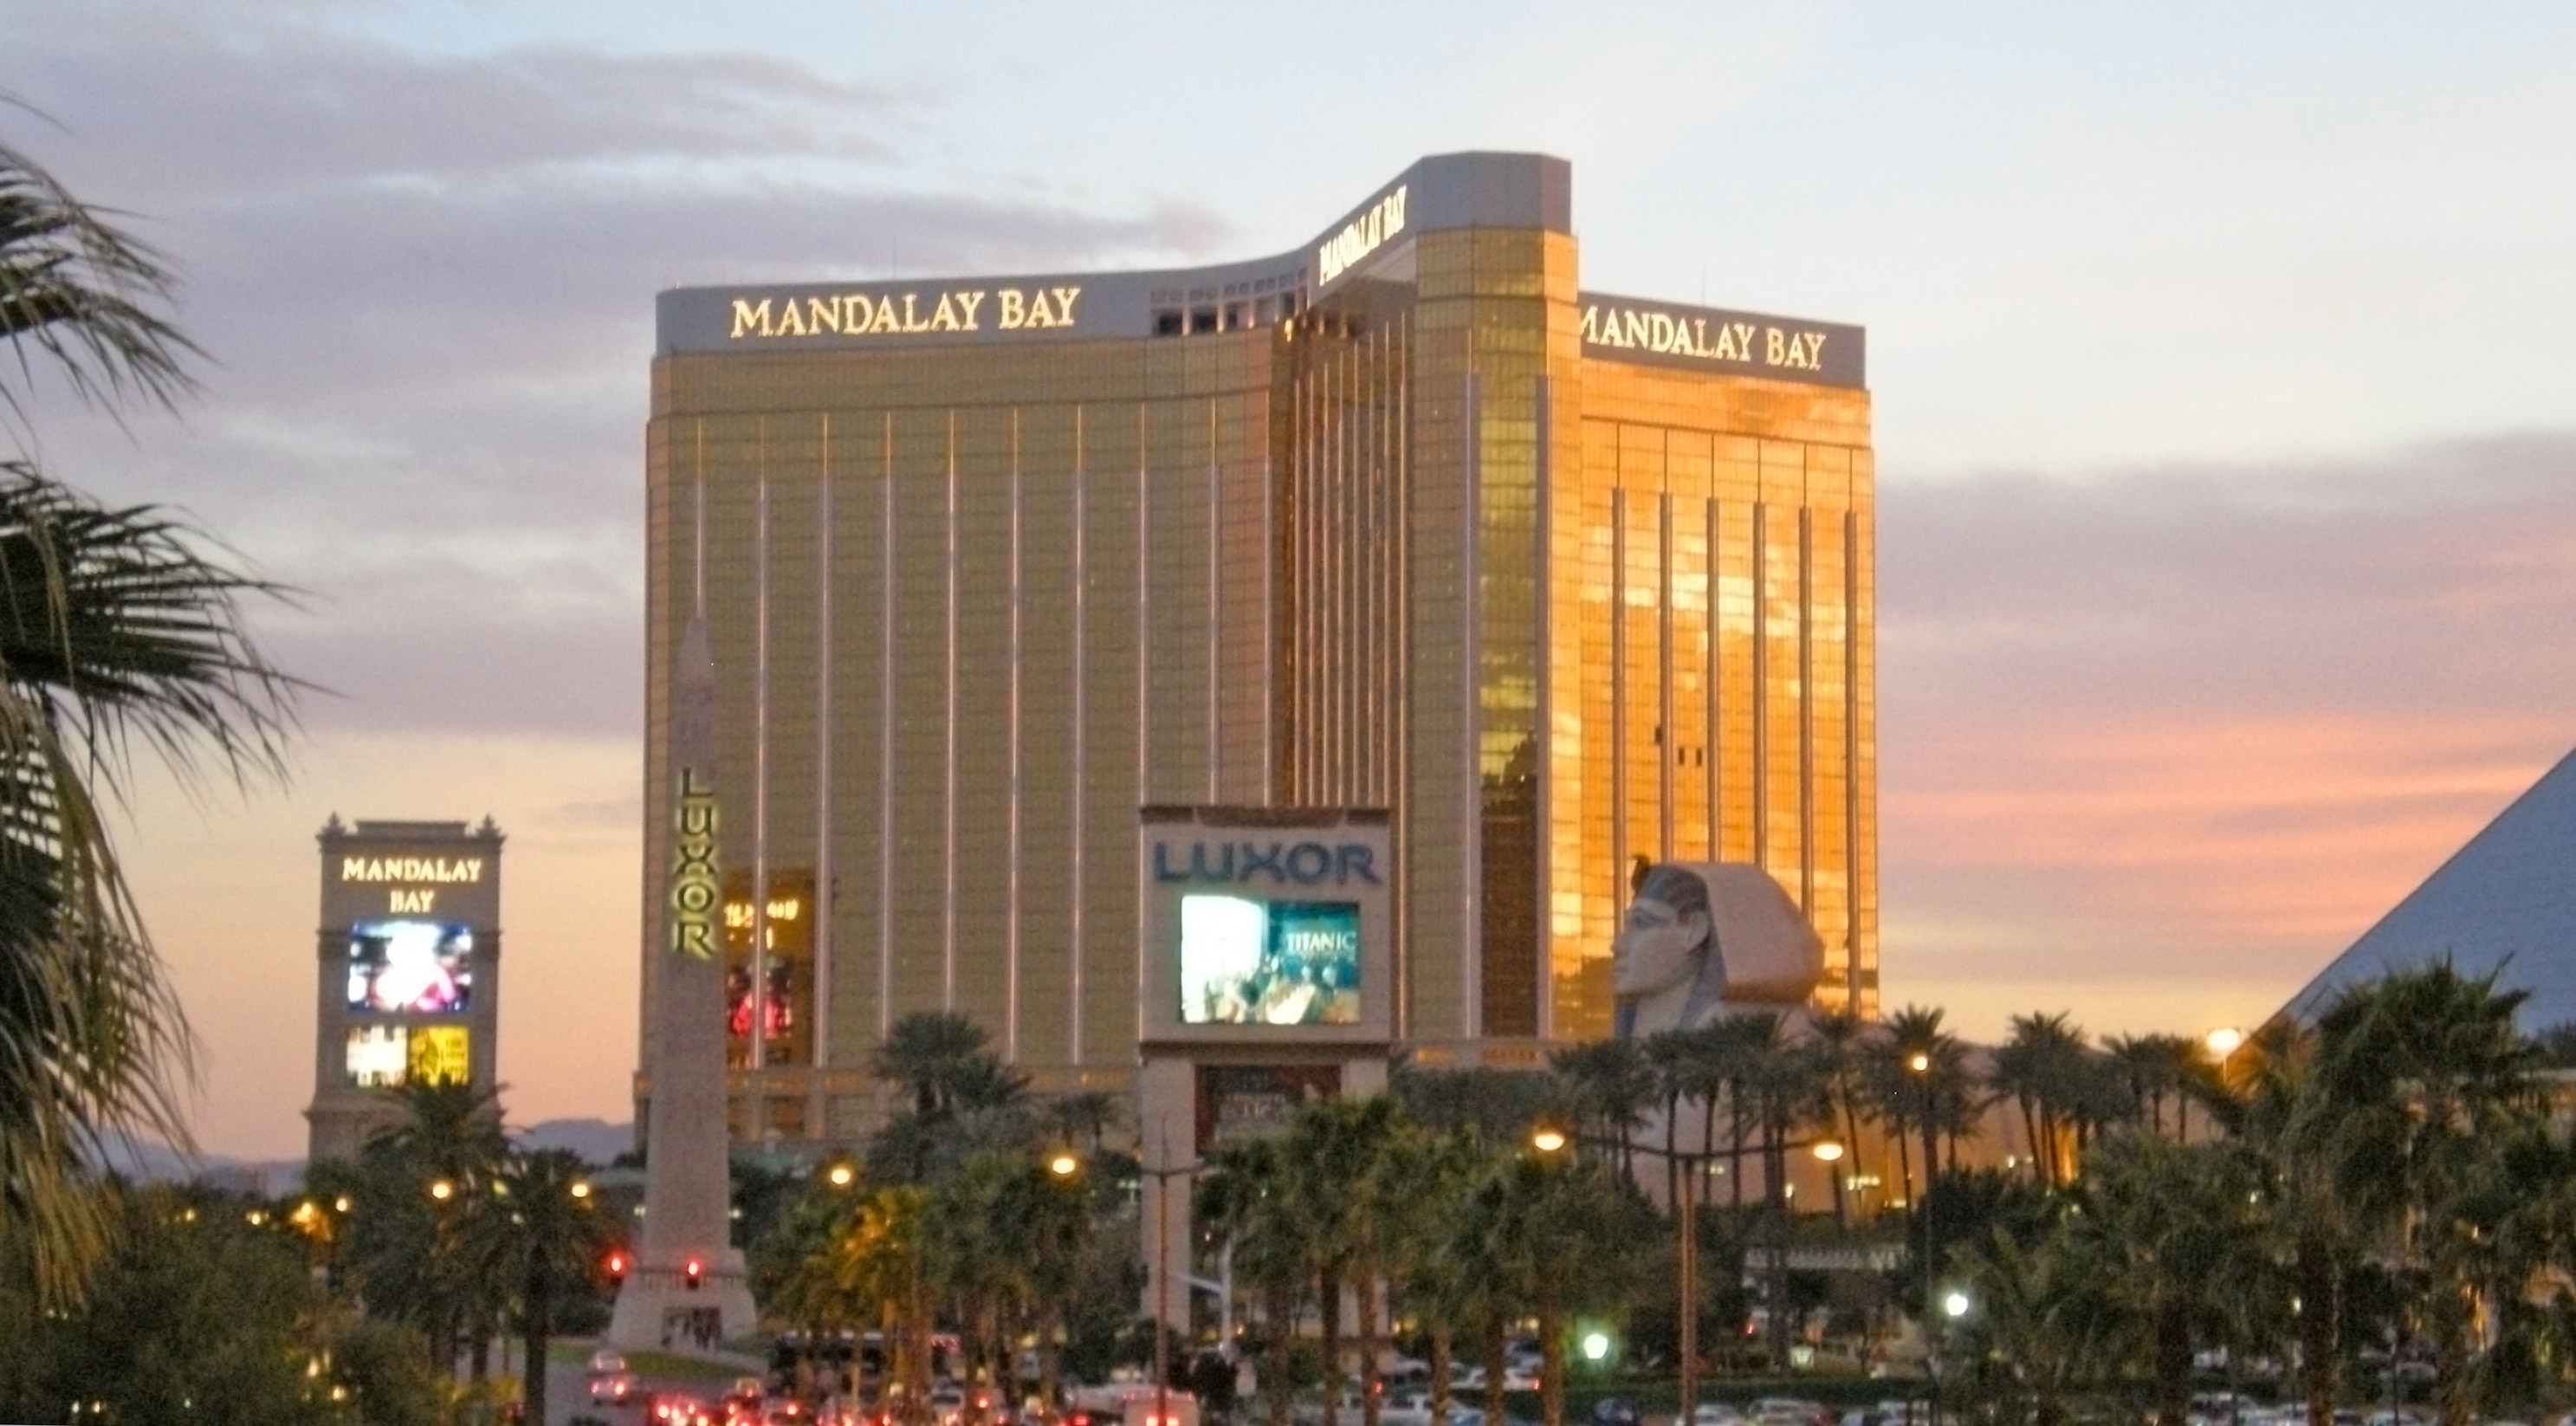 On This Date March 2, 1999 Mandalay Bay Opened in Las Vegas Las